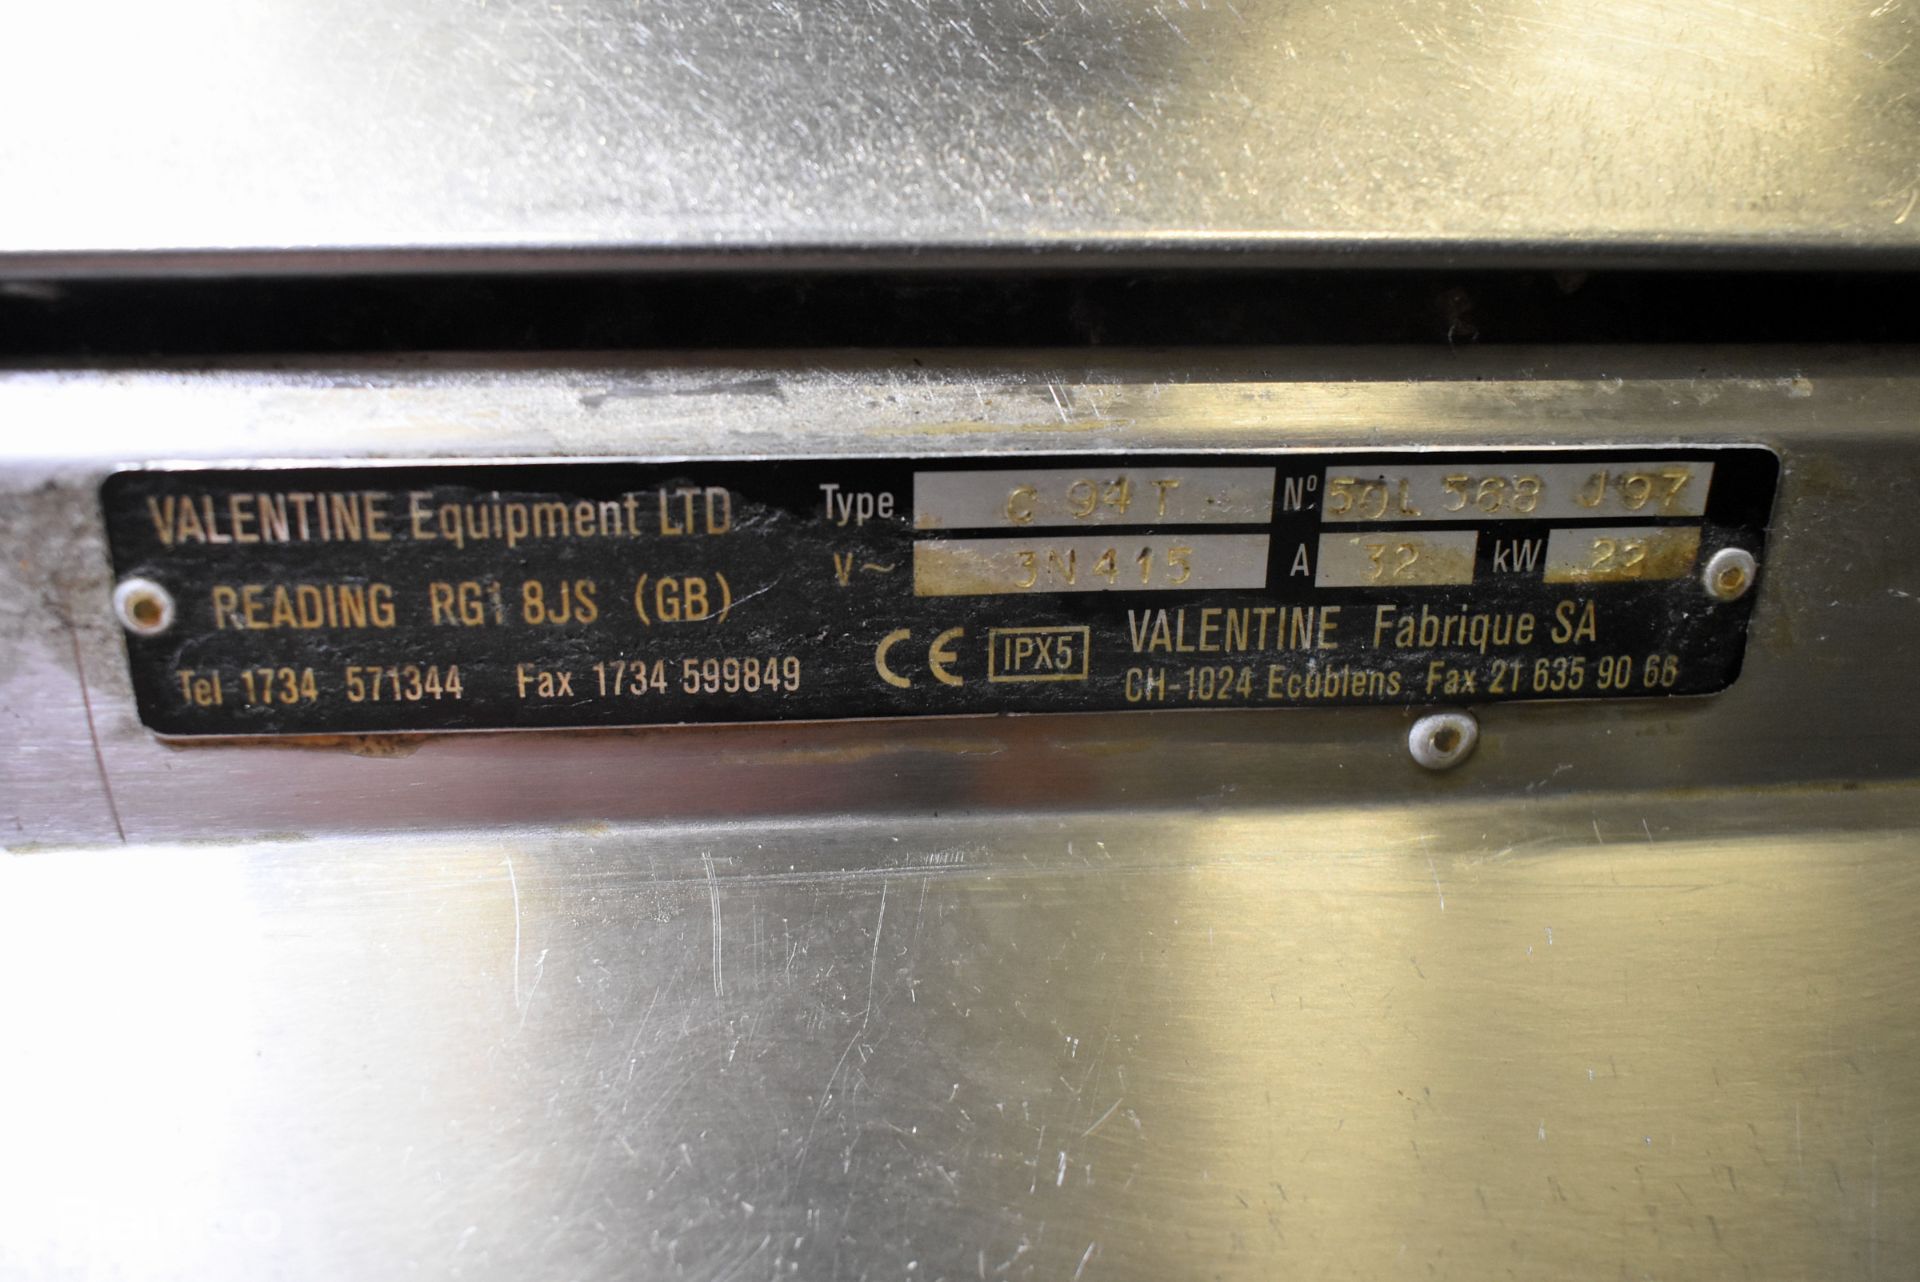 Valentine Equipment C94T stainless steel single tank electric fryer - W 400 x D 600 x H 850mm - Image 4 of 8